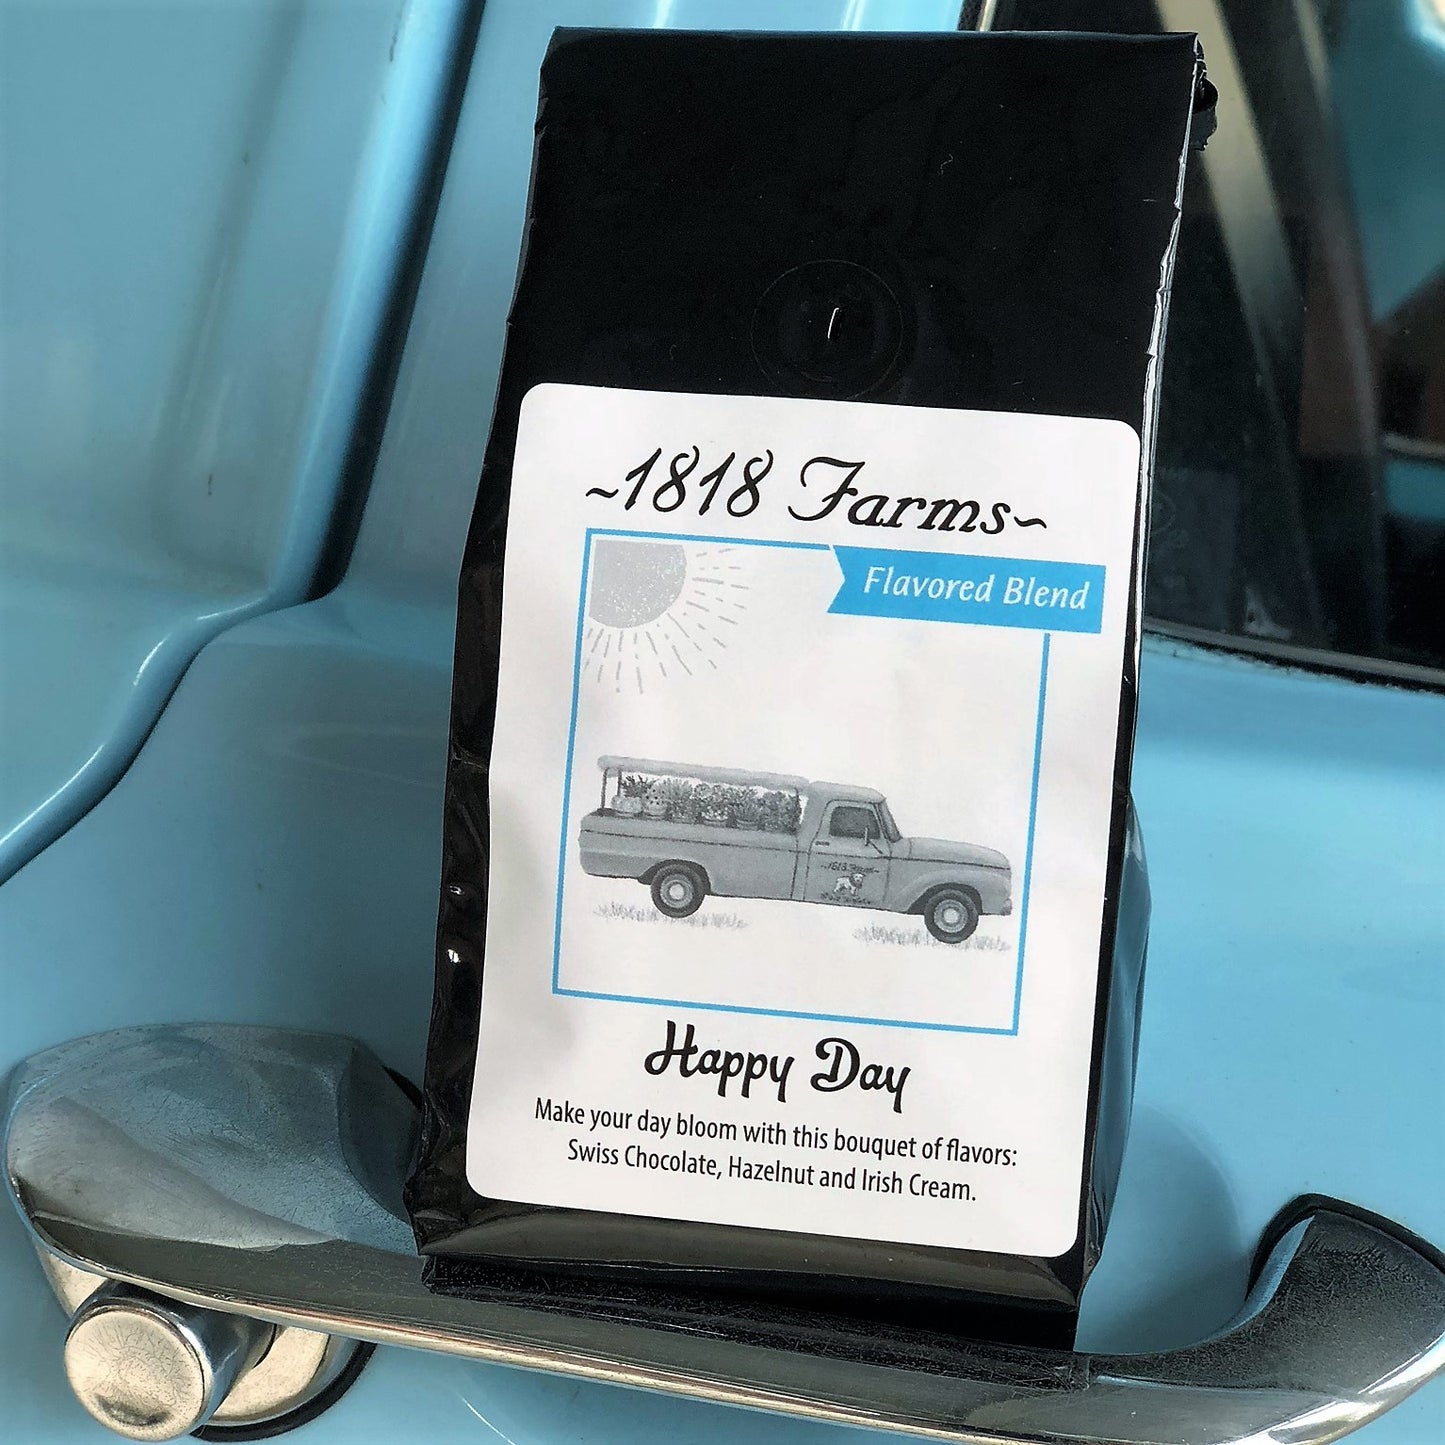 1818 Farms Signature Coffee | Flavored Blend | Happy Day Coffee 1818 Farms   